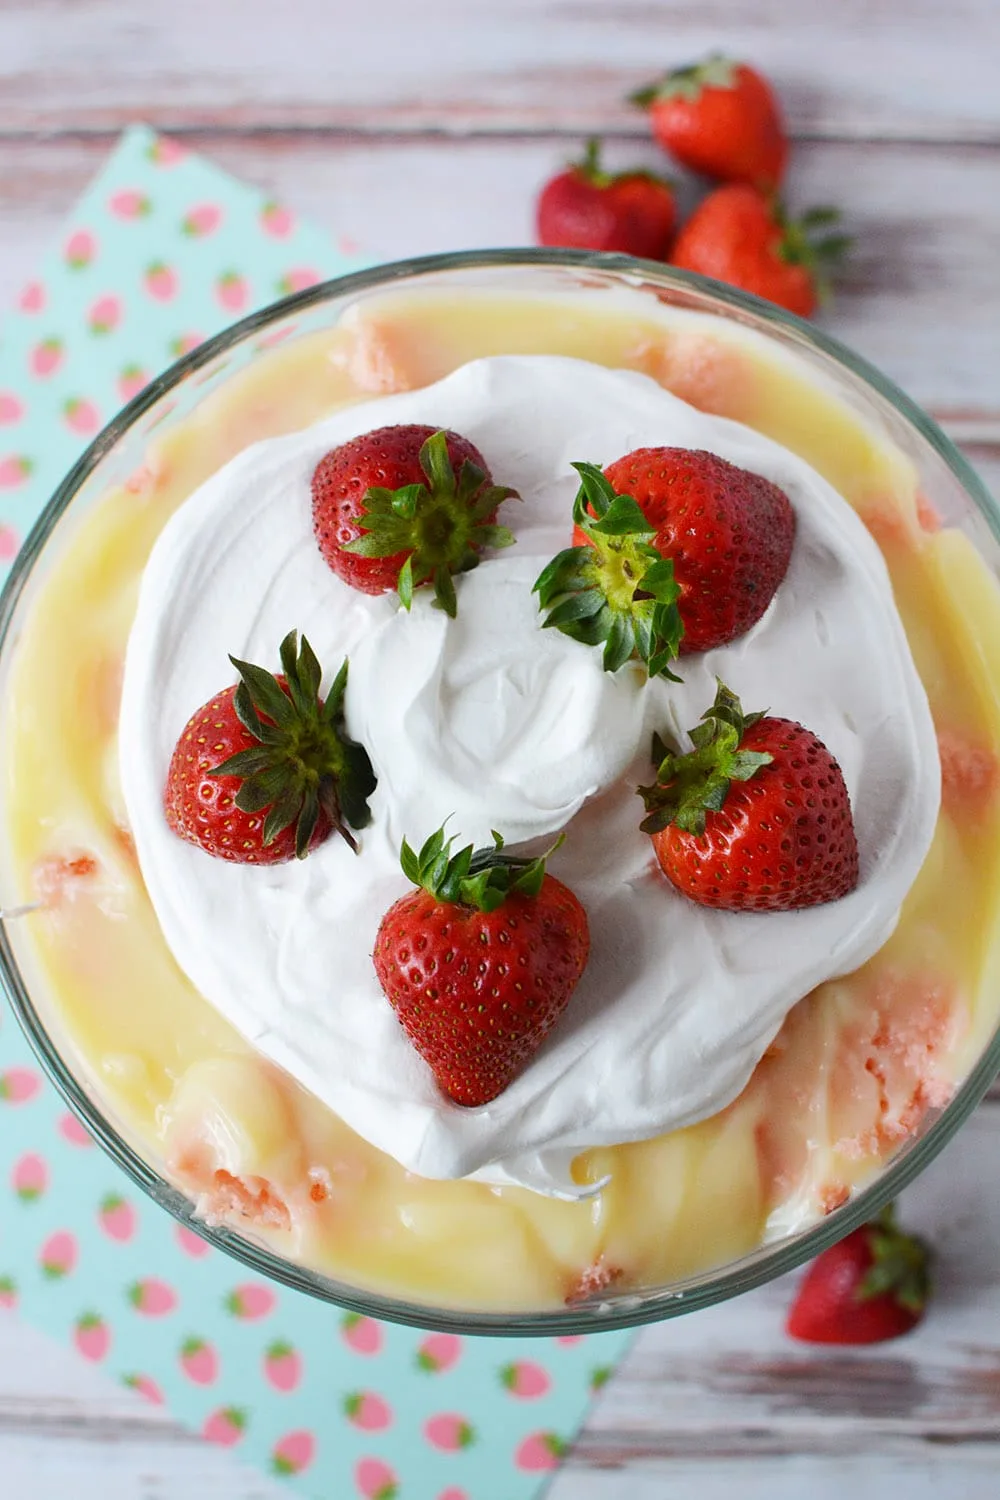 Fresh whole strawberries on top of a trifle.